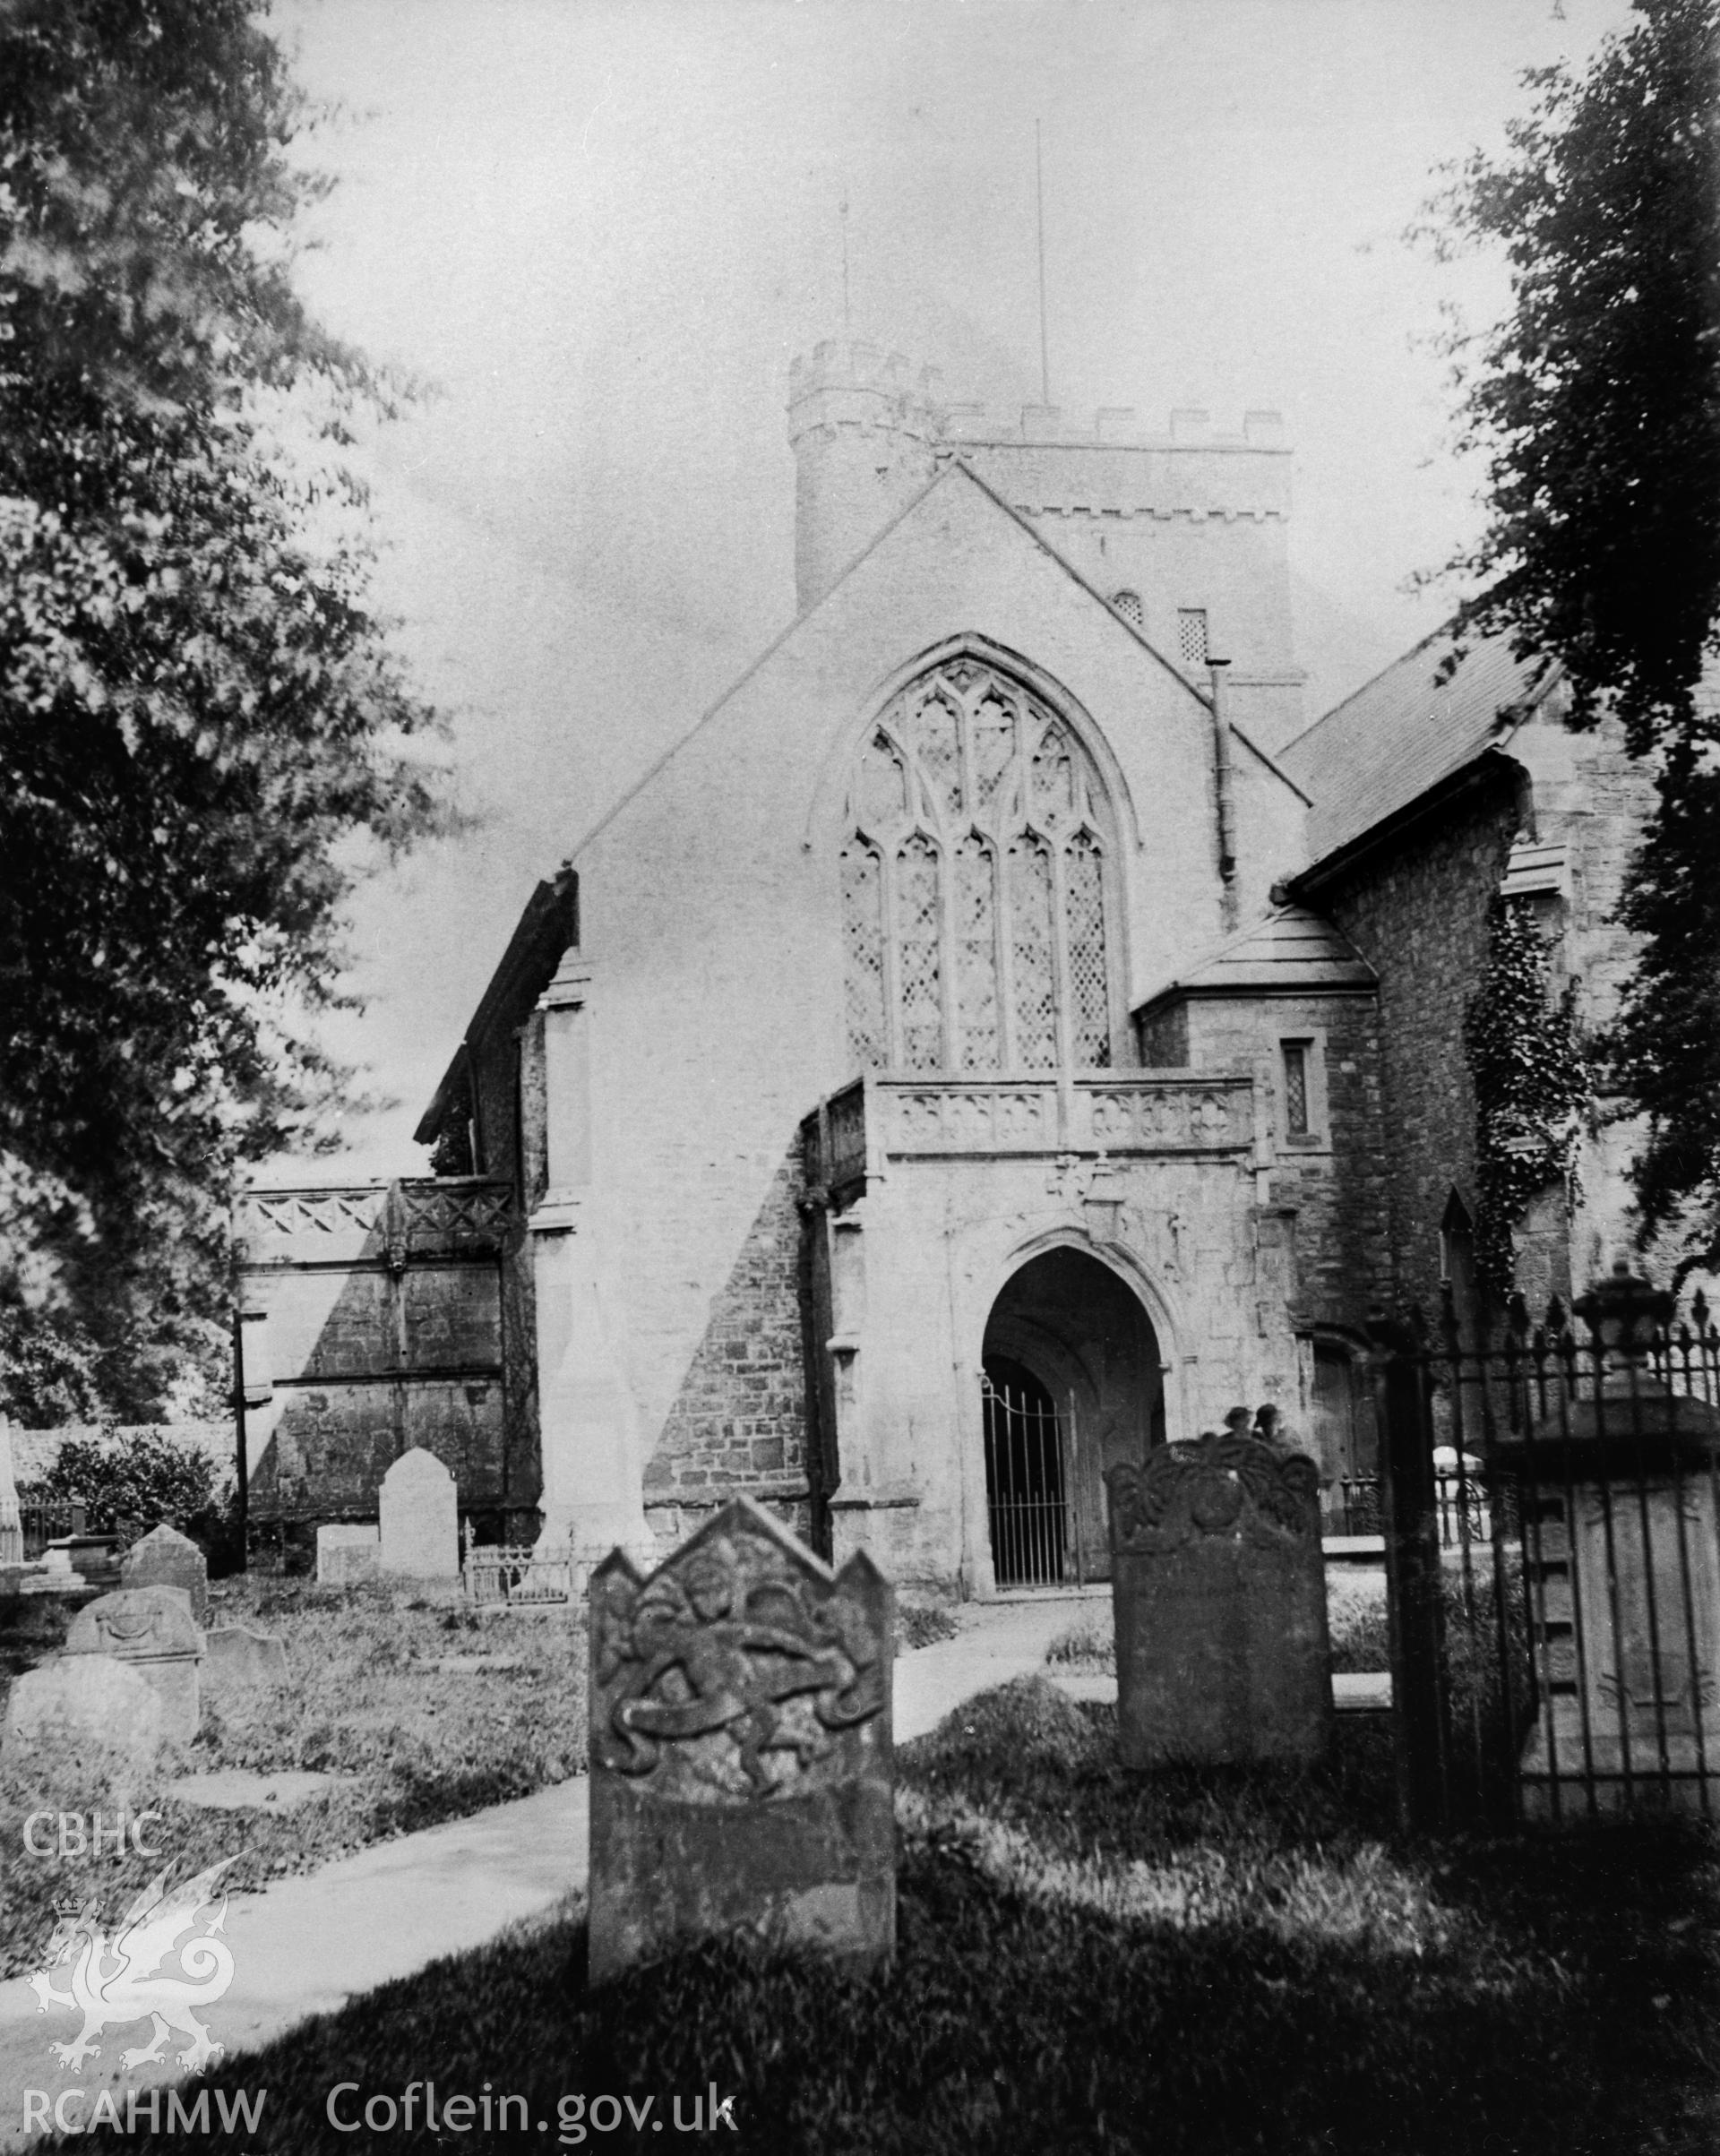 St Mary's Church, Usk; black and white photograph showing an exterior view of the church from the west, copied from an early print from the Rhayader Collection, loaned for copying by P.M. Reid.